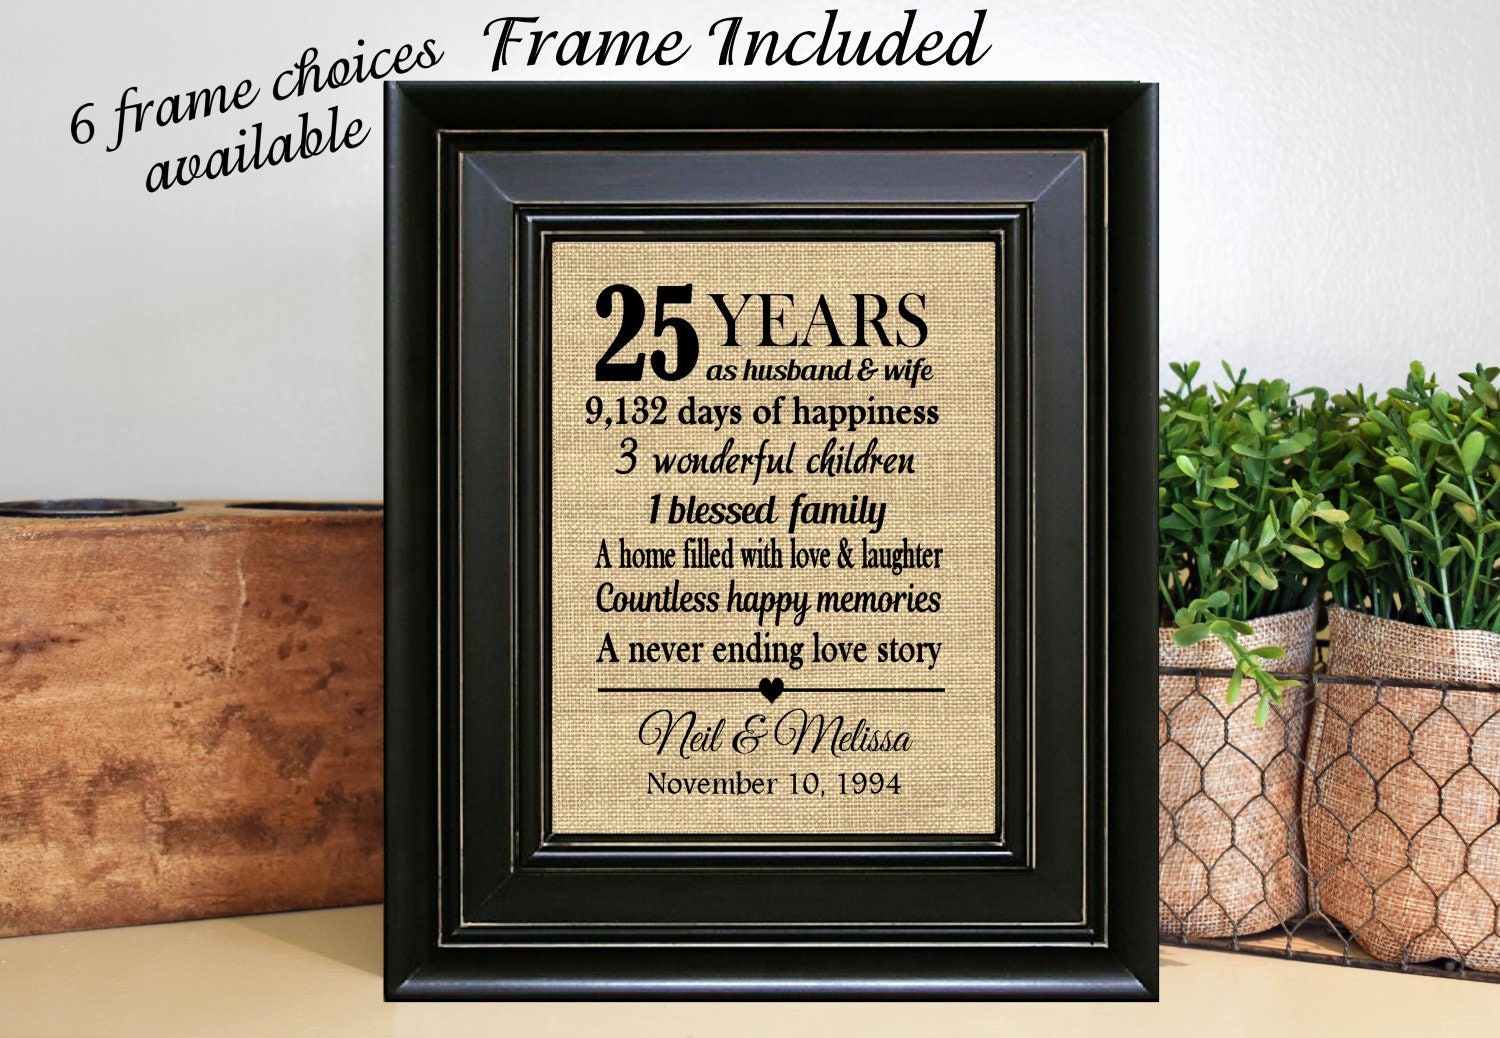 Gifts For 25th Wedding Anniversary To A Couple
 FRAMED Personalized 25th Wedding Anniversary Gift 25th